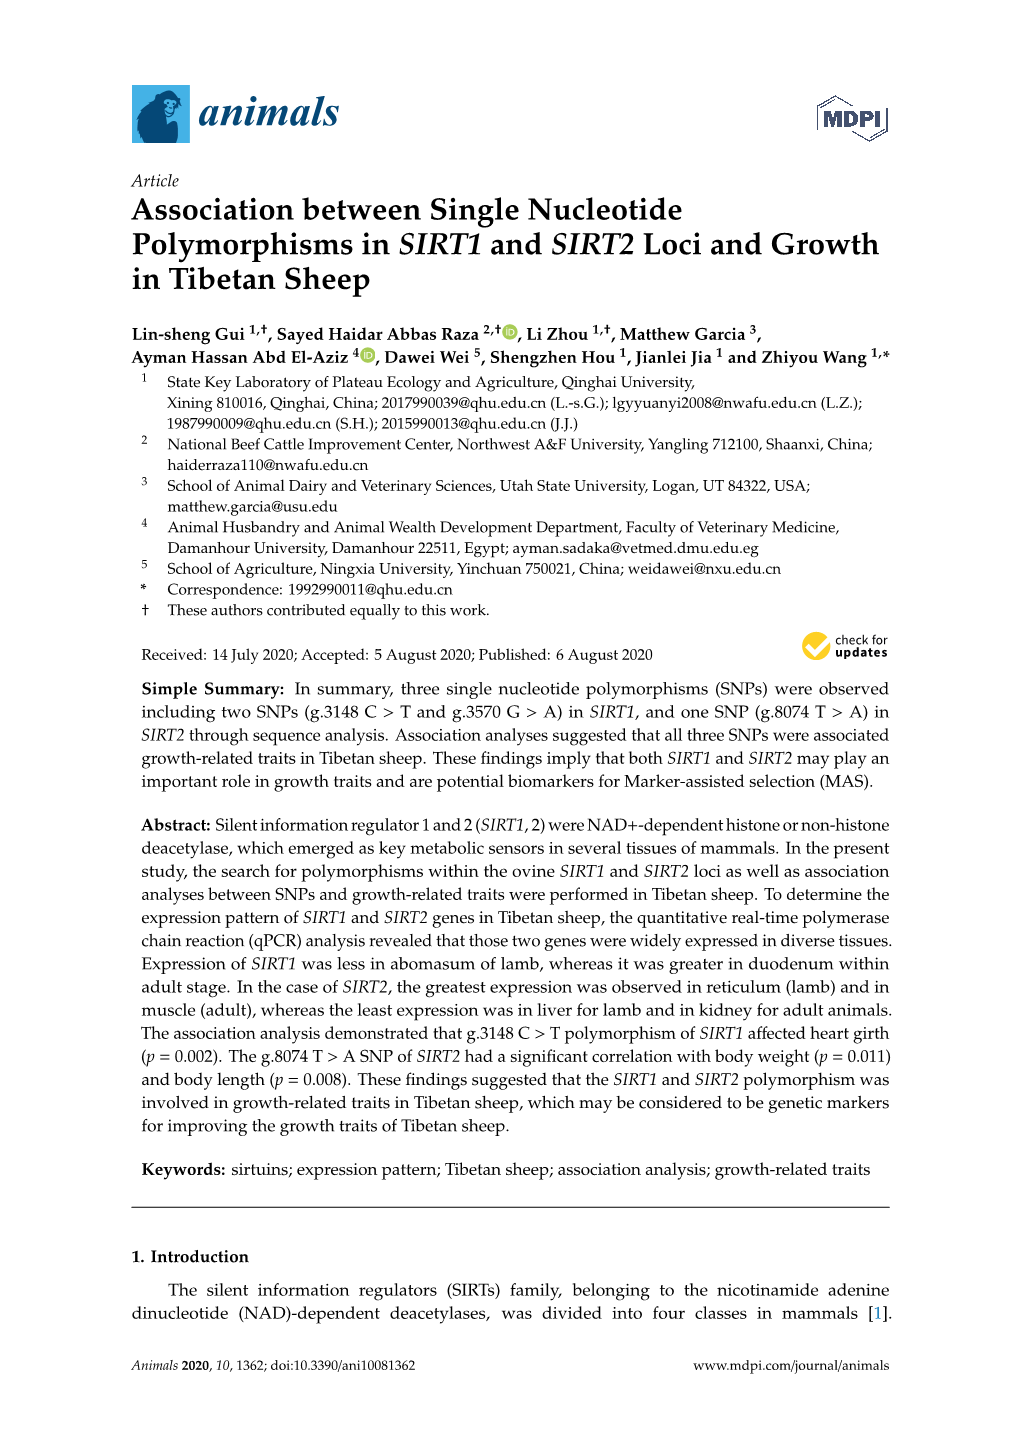 Association Between Single Nucleotide Polymorphisms in SIRT1 and SIRT2 Loci and Growth in Tibetan Sheep